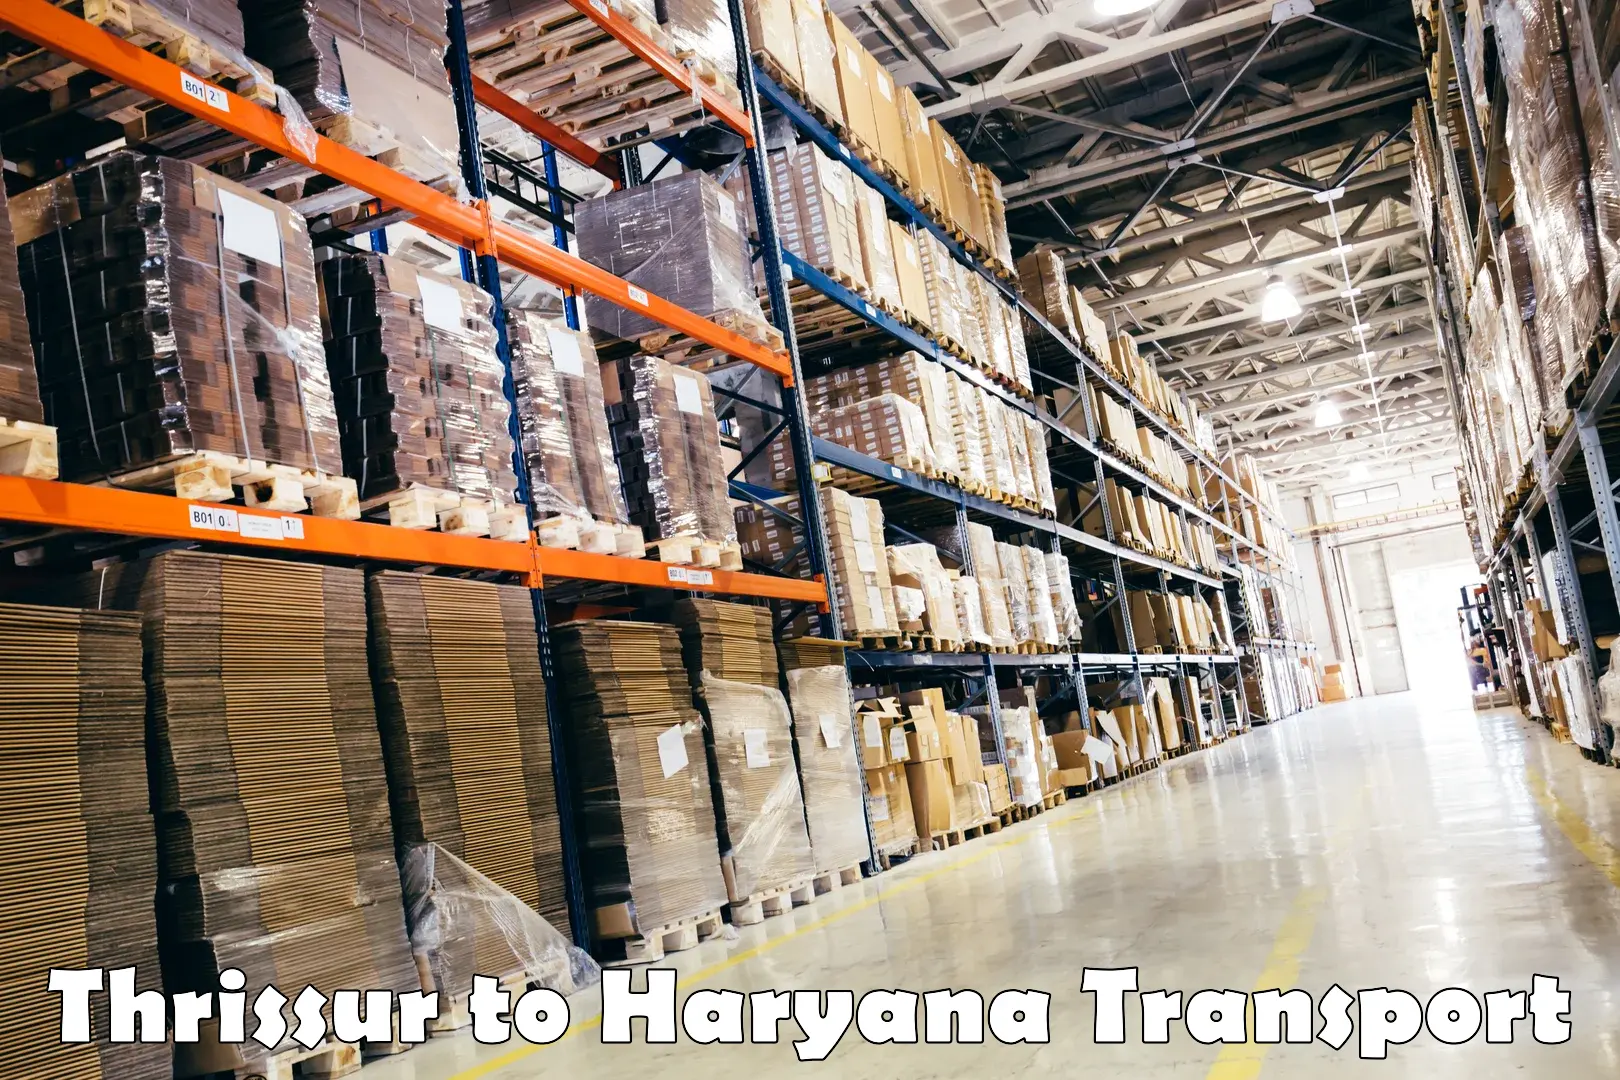 Cargo transport services Thrissur to NCR Haryana